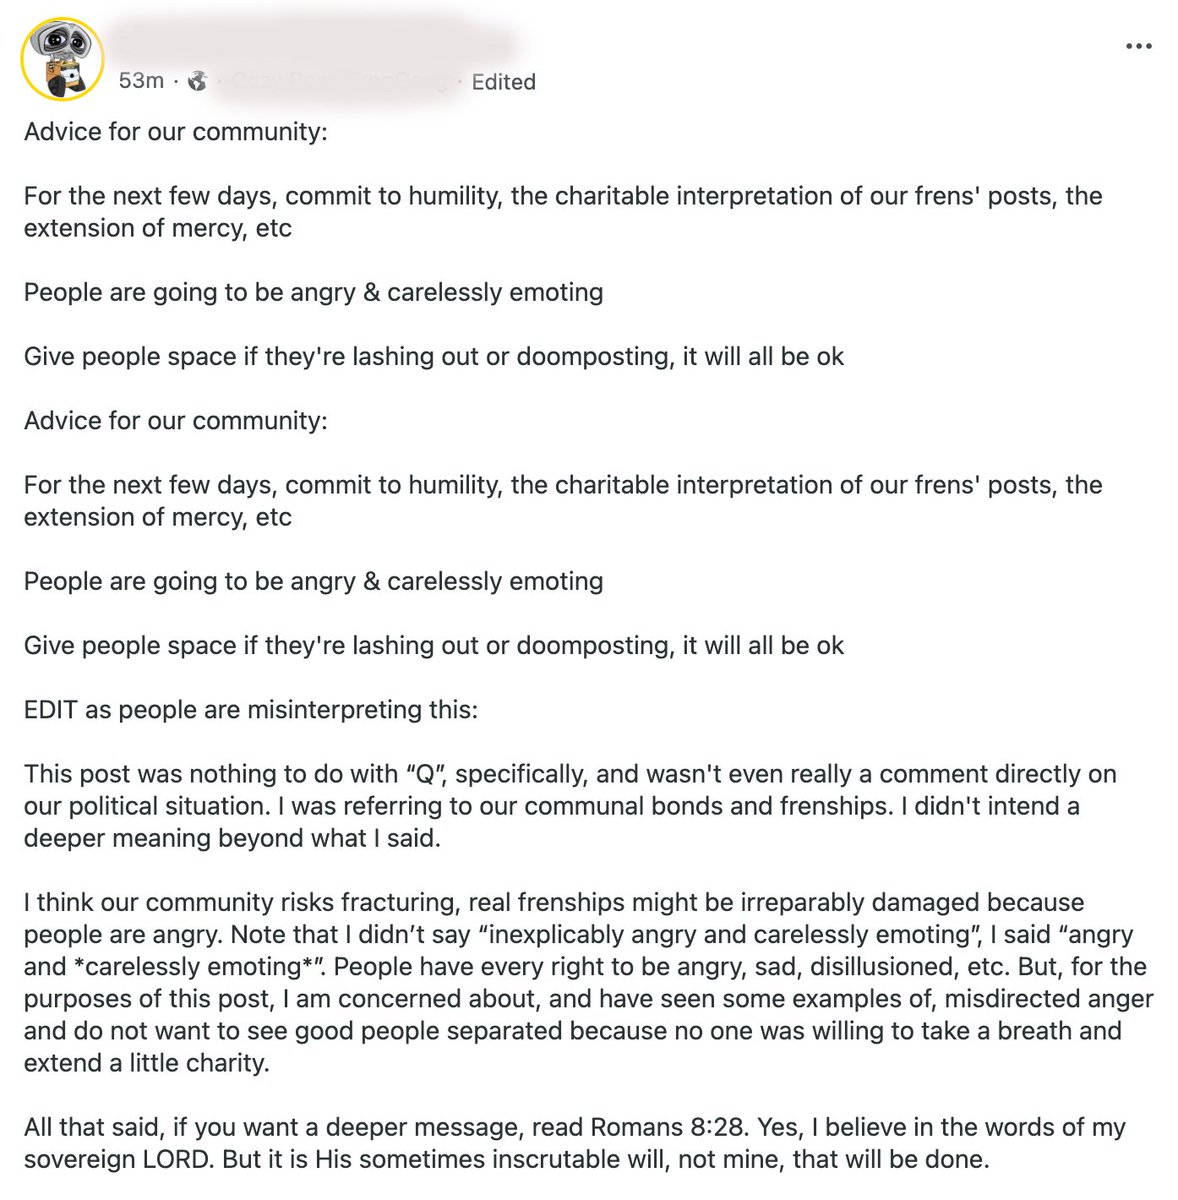 Another one says the QAnon community "risks fracturing" and "real friendships might be irreparably damaged because people are angry"."People have every right to be angry, sad, disillusioned," he adds, asking for "charitable interpretation of our friends' posts".